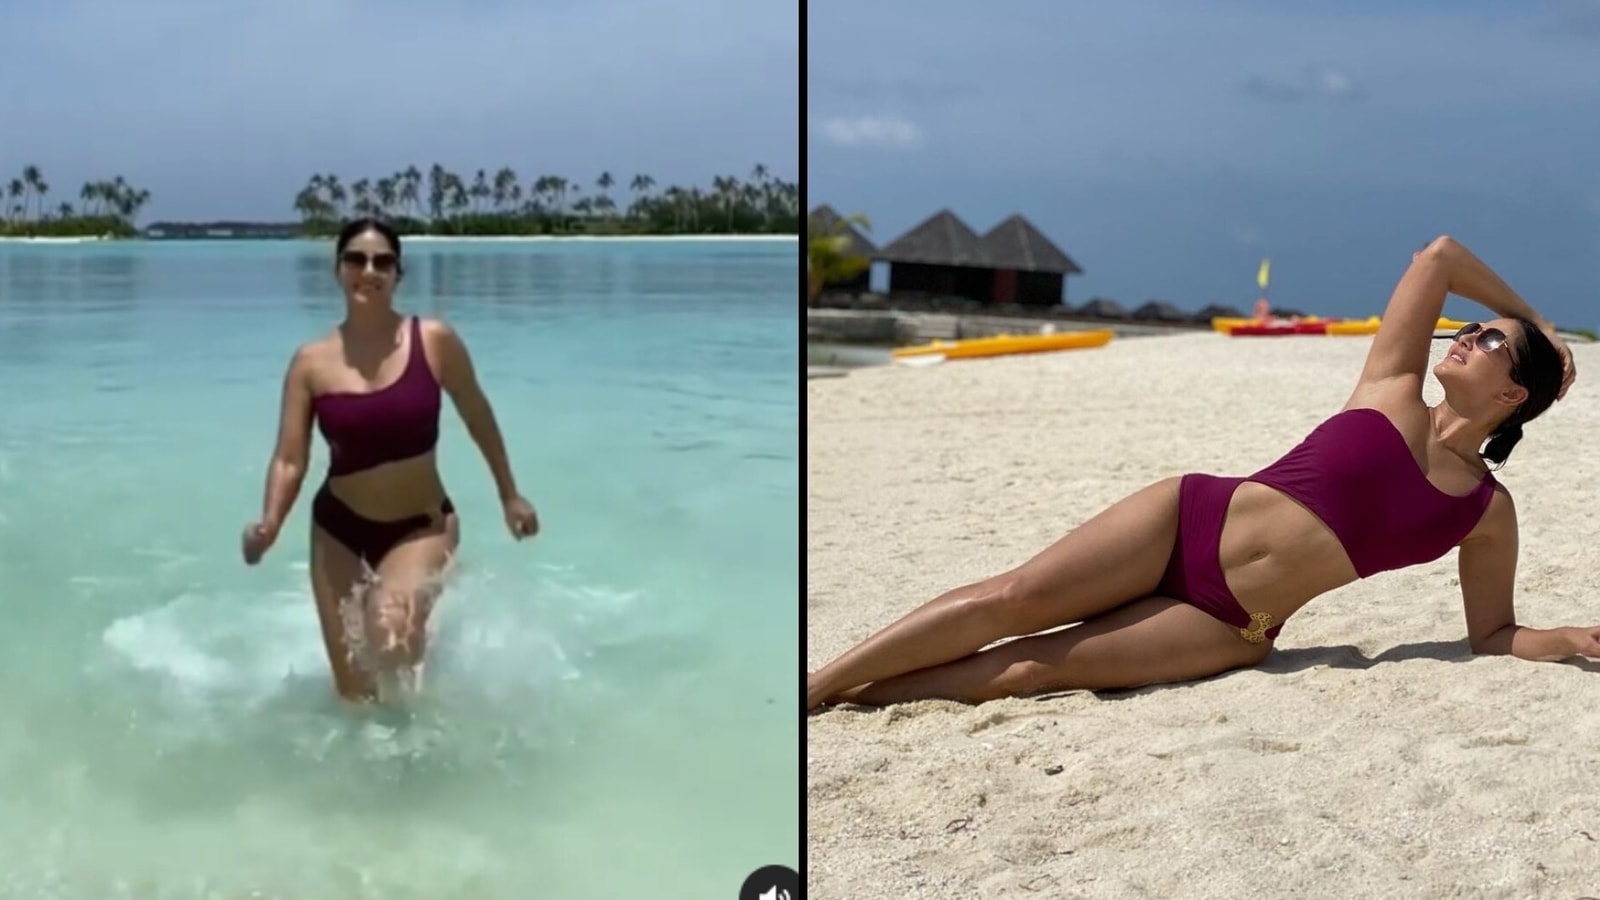 Sanny Loney New Xnxx Videos - Sunny Leone does slo-mo run as she emerges from water, blows kiss. Watch  video from Maldives holiday | Bollywood - Hindustan Times